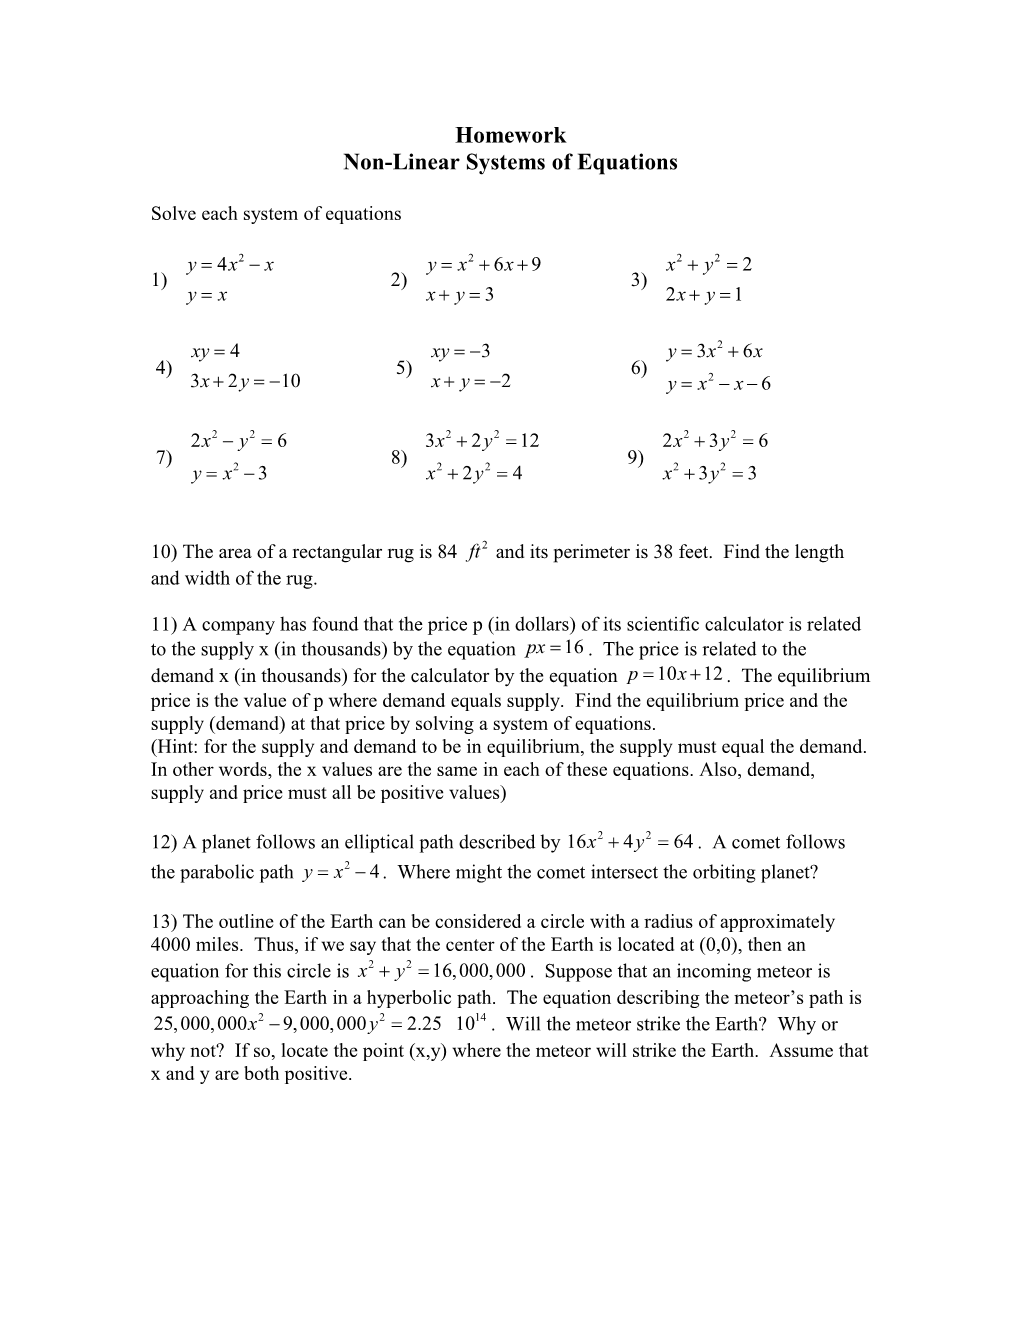 Non-Linear Systems of Equations